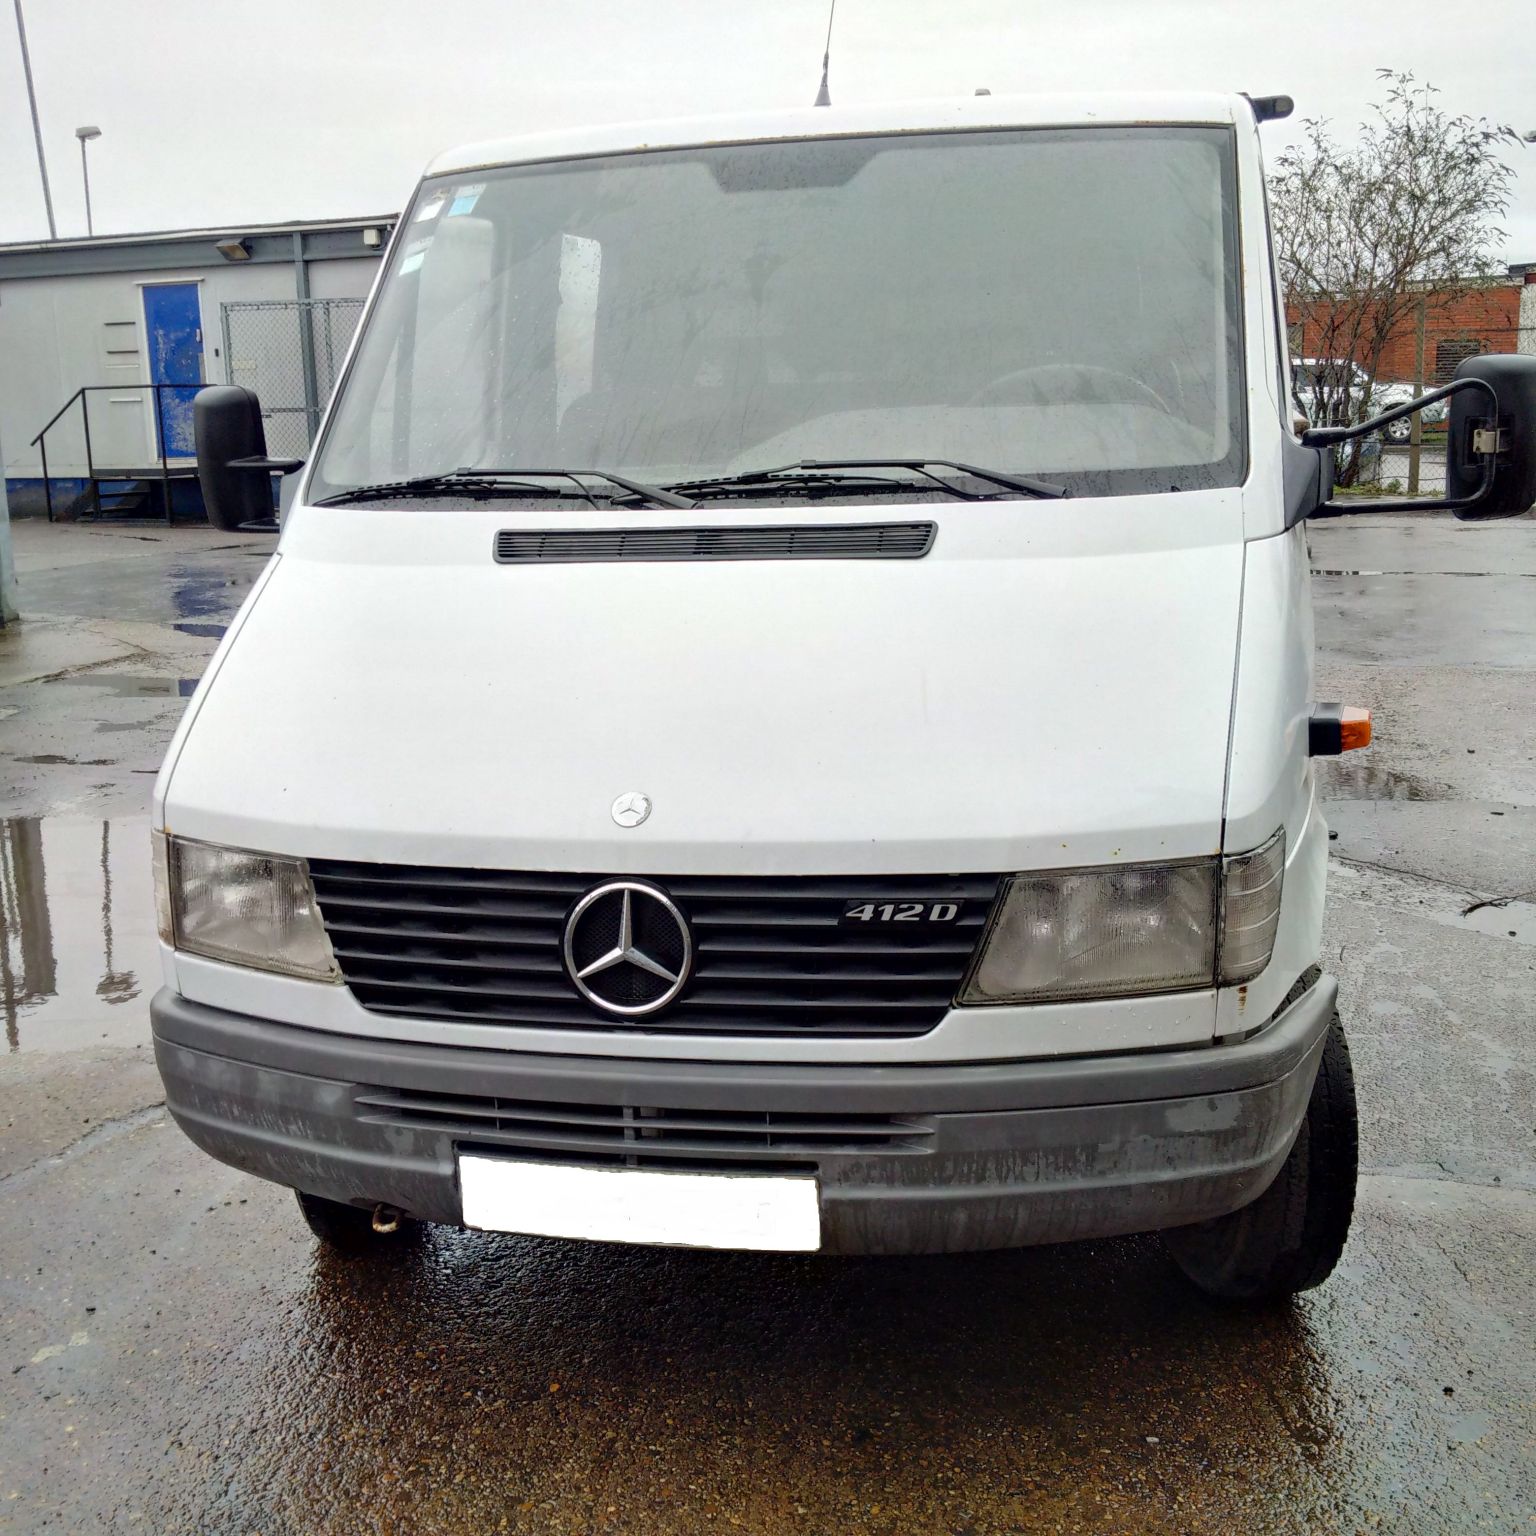 lhd minibus for sale in uk